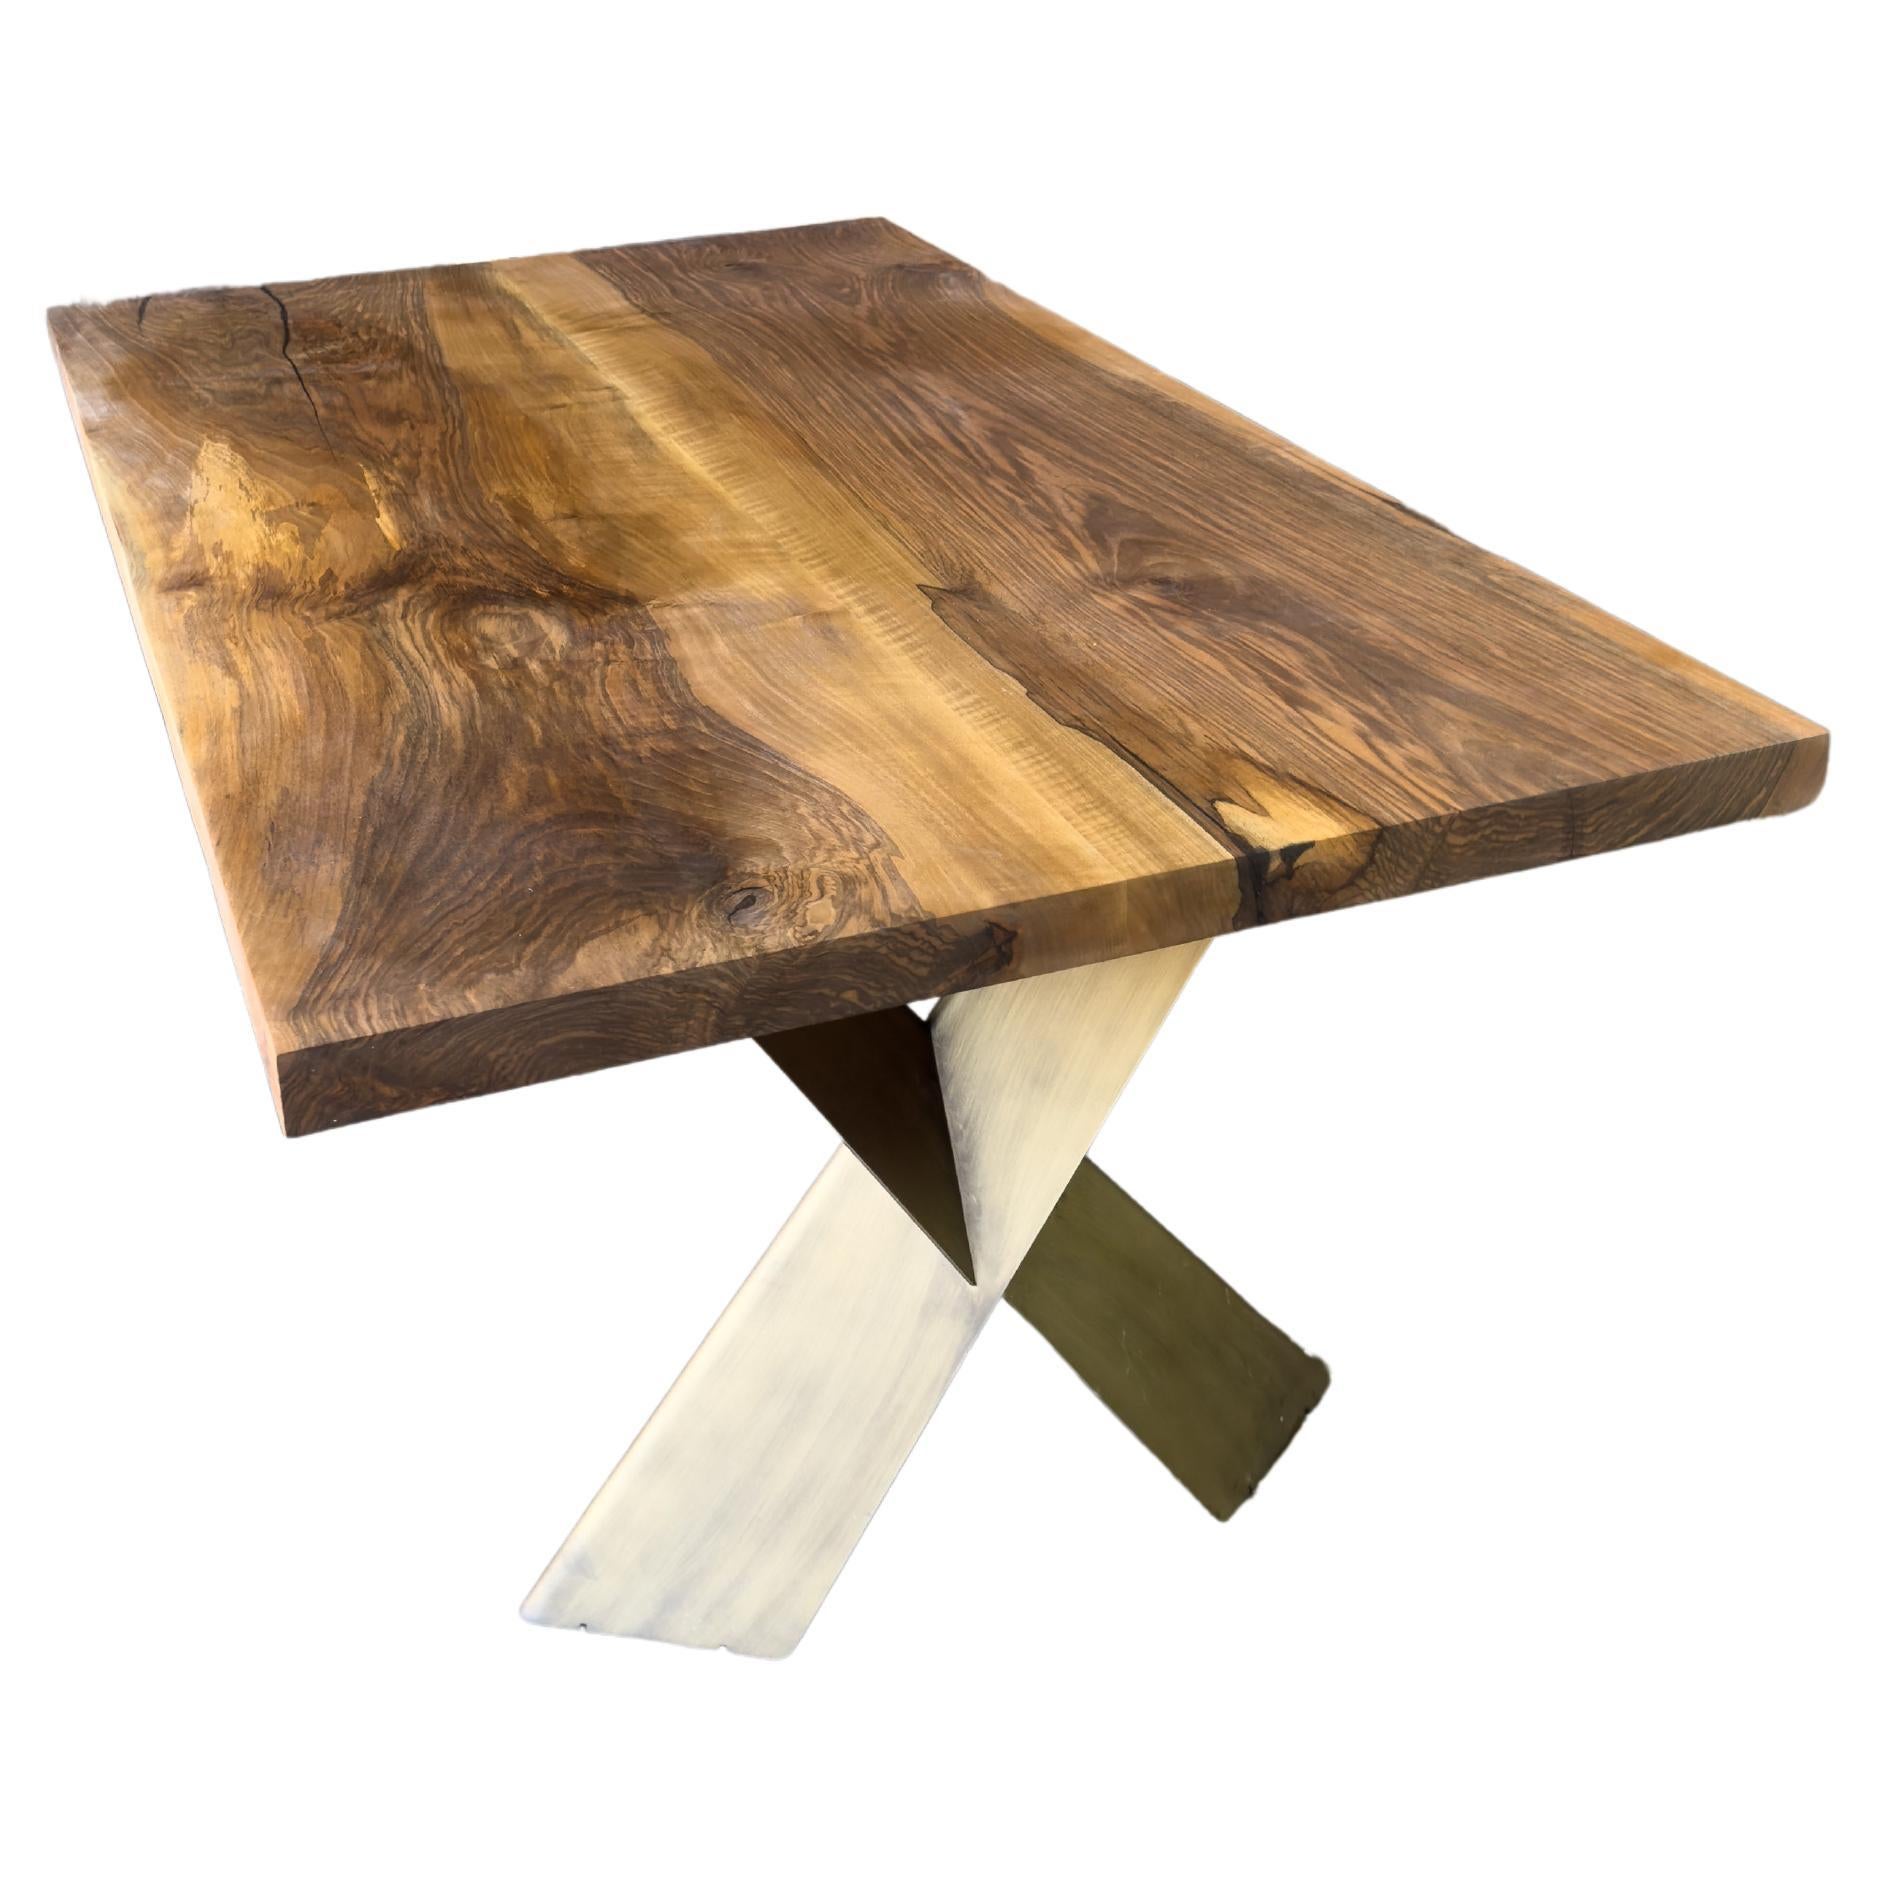 Rustic Wooden Live Edge Black Walnut Custom Dining Table For Sale